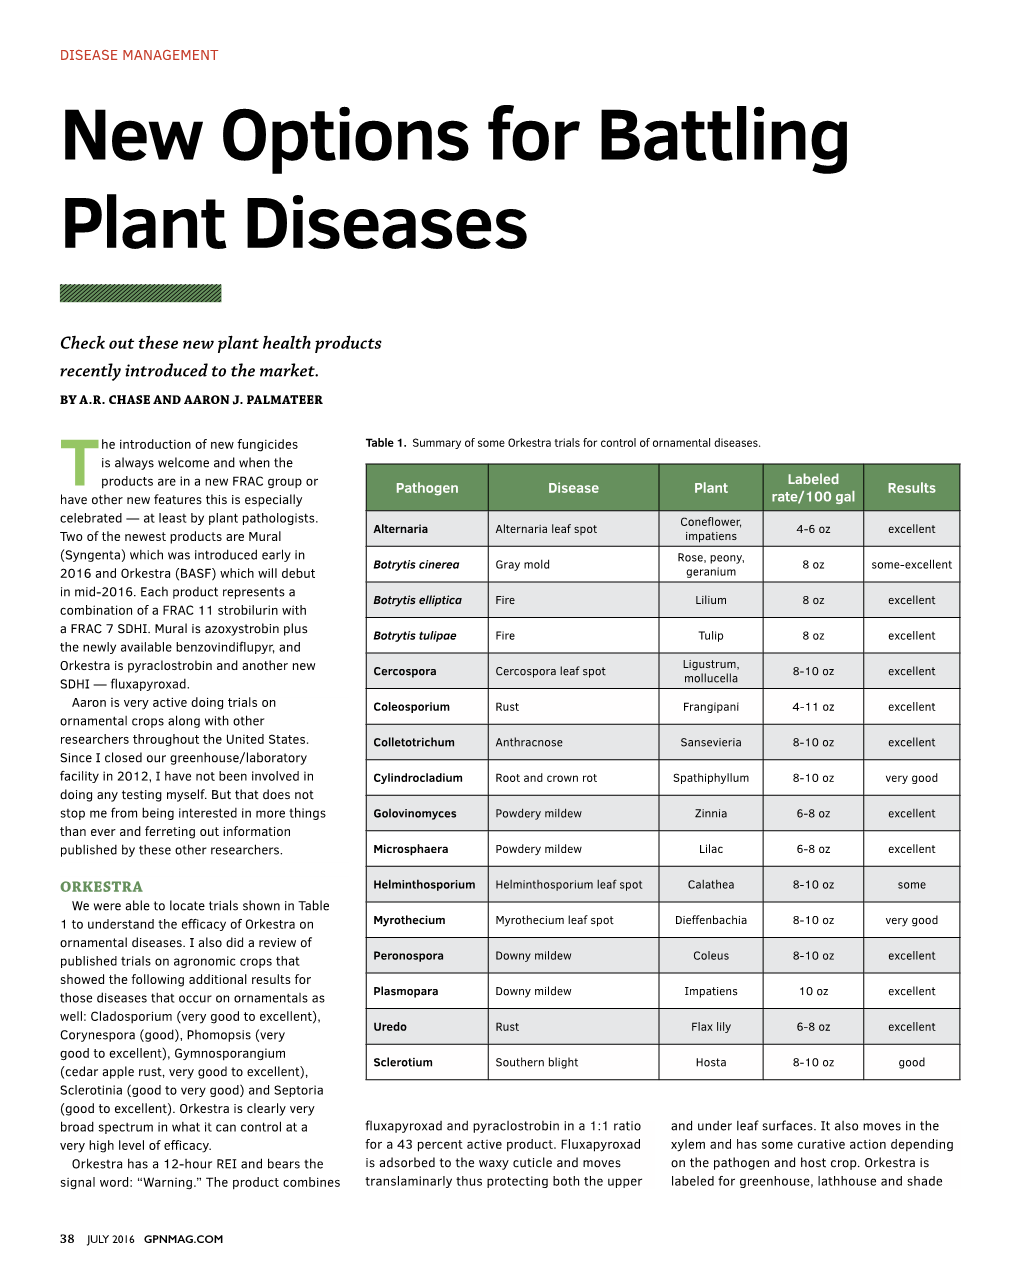 New Options for Battling Plant Diseases